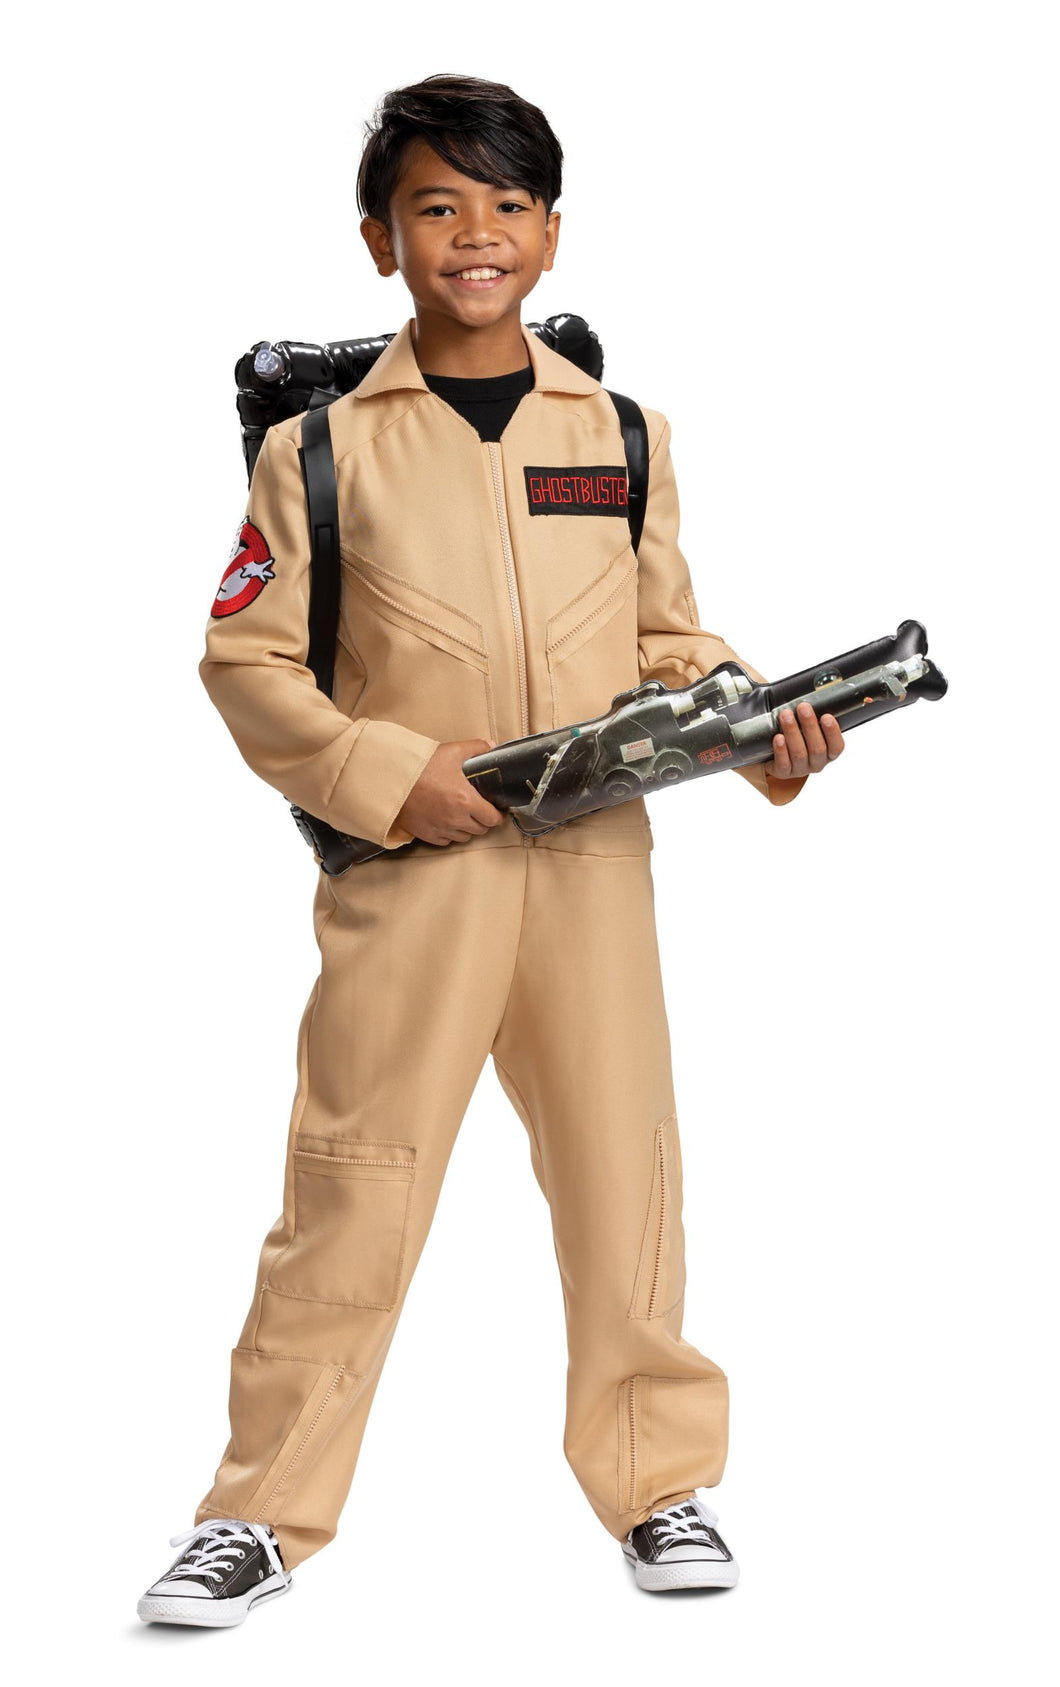 Ghostbusters Jumpsuit with Proton Pack Child Costume Small 4-6